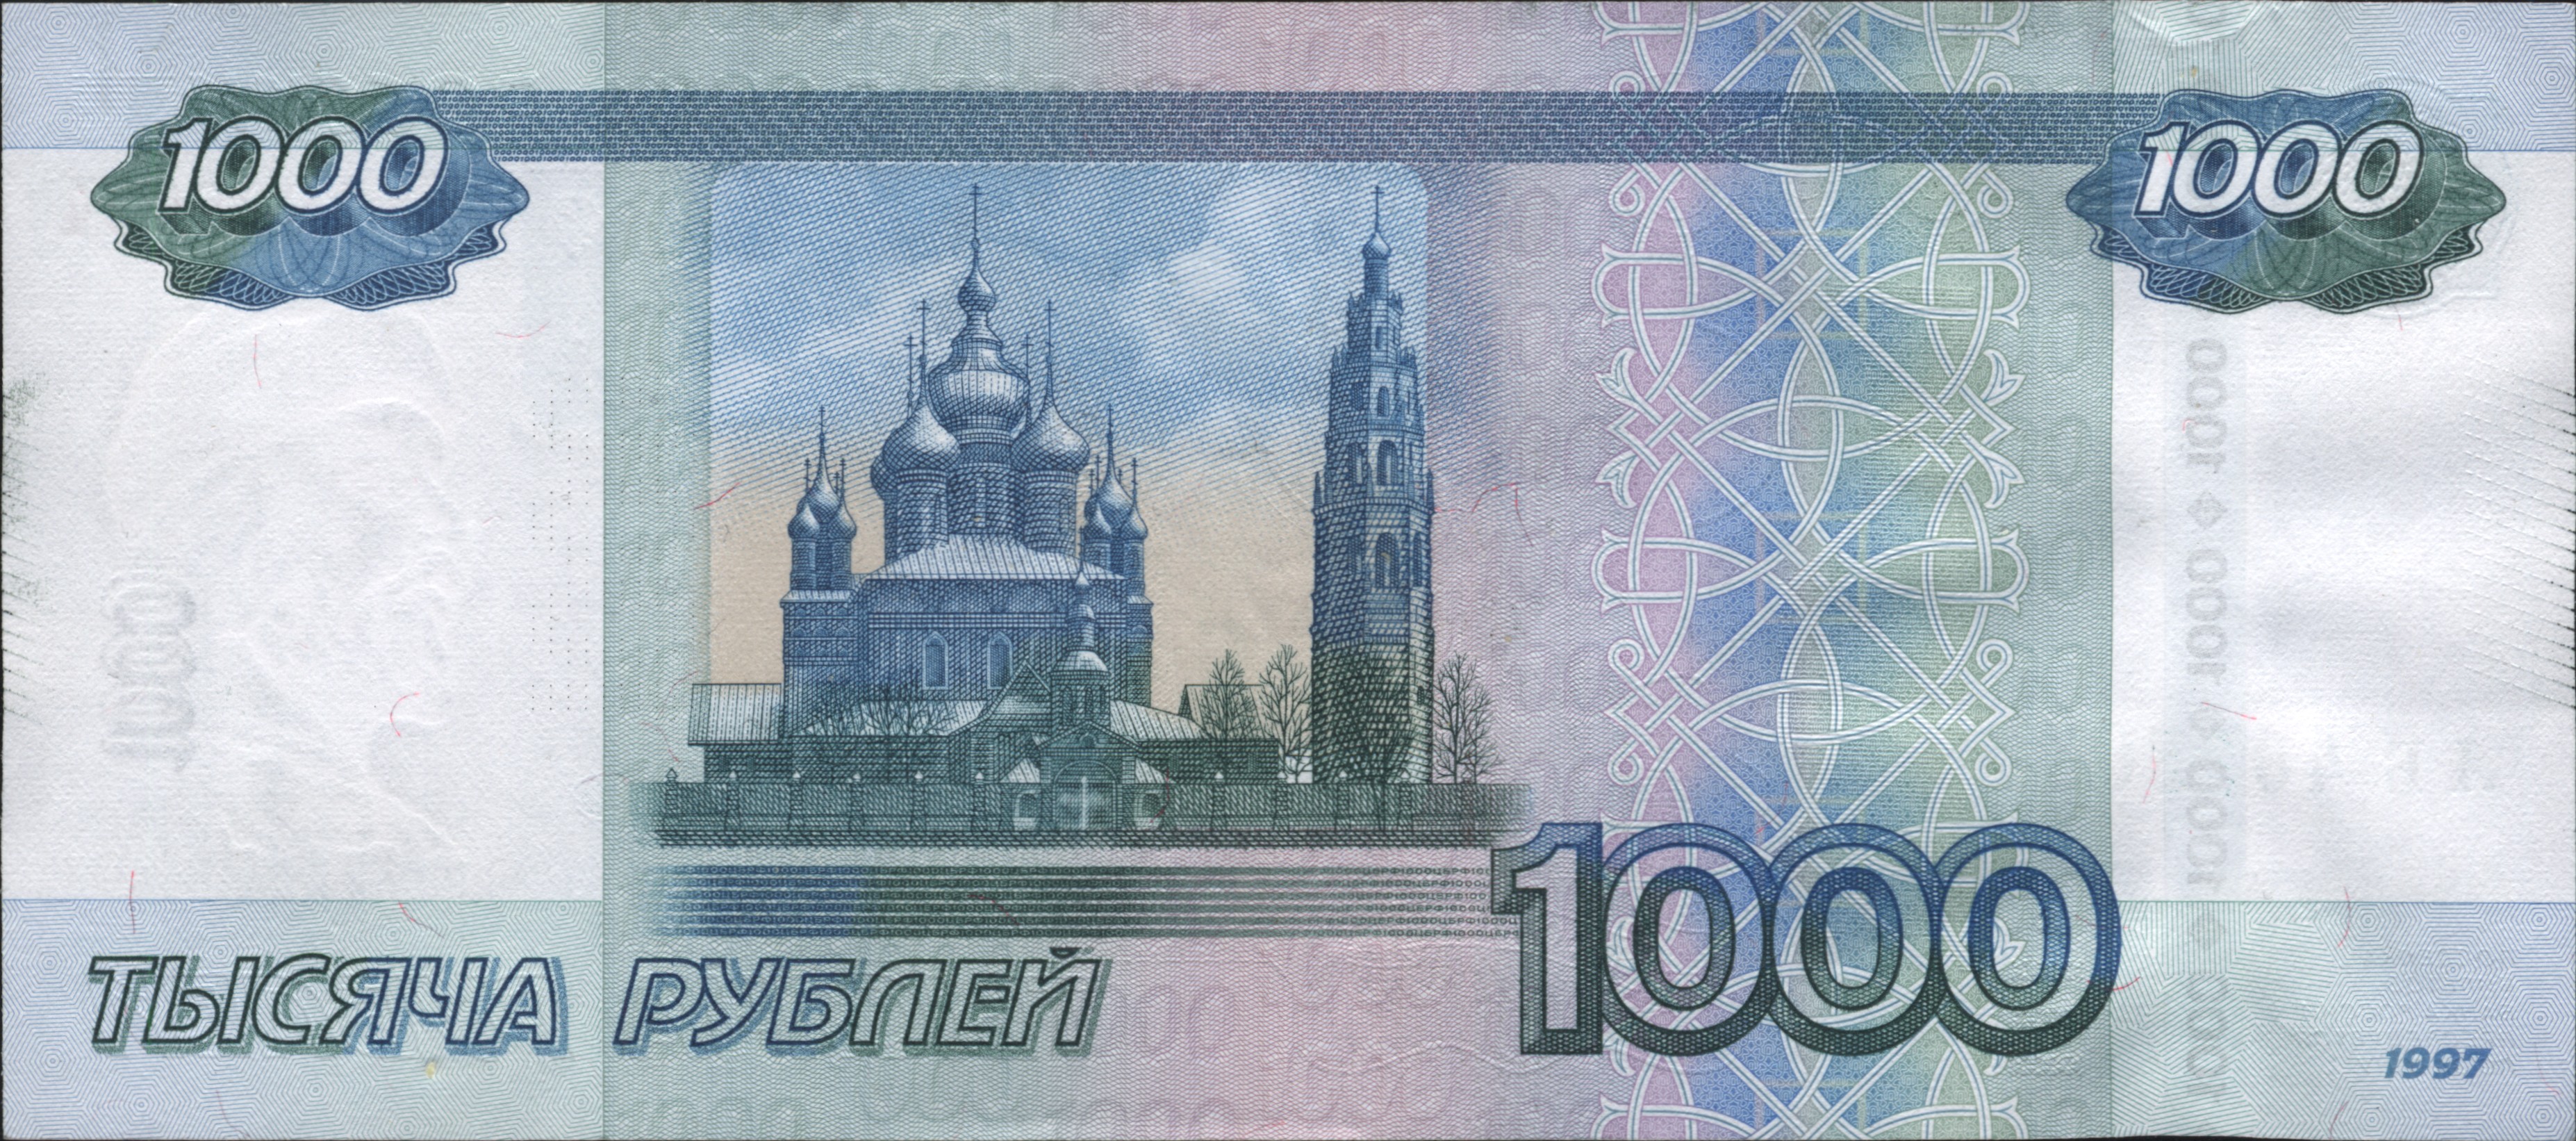 File:1000 Roubles 2010 back.jpg - Wikimedia Commons